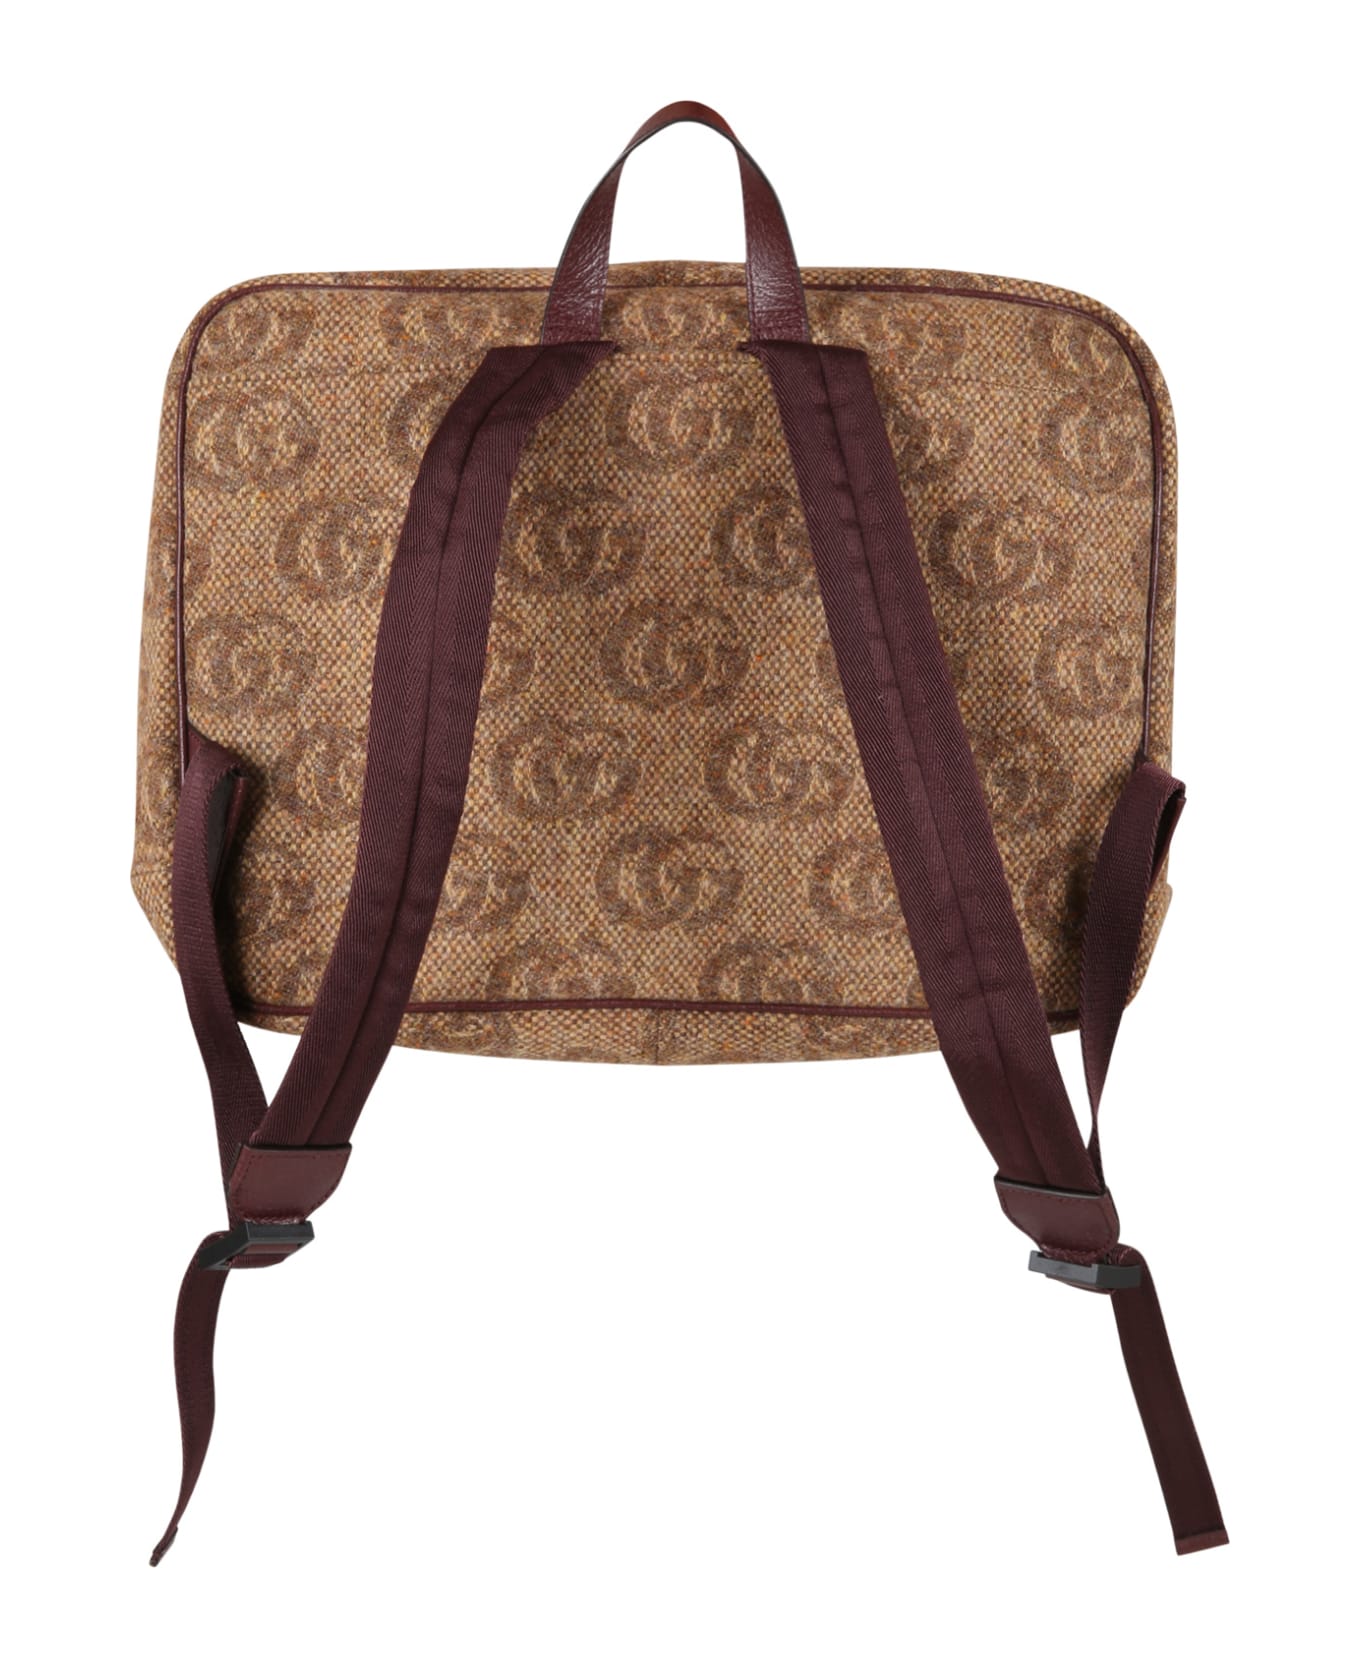 Gucci Brown Backpack For Kid With Gg Motif - Brown